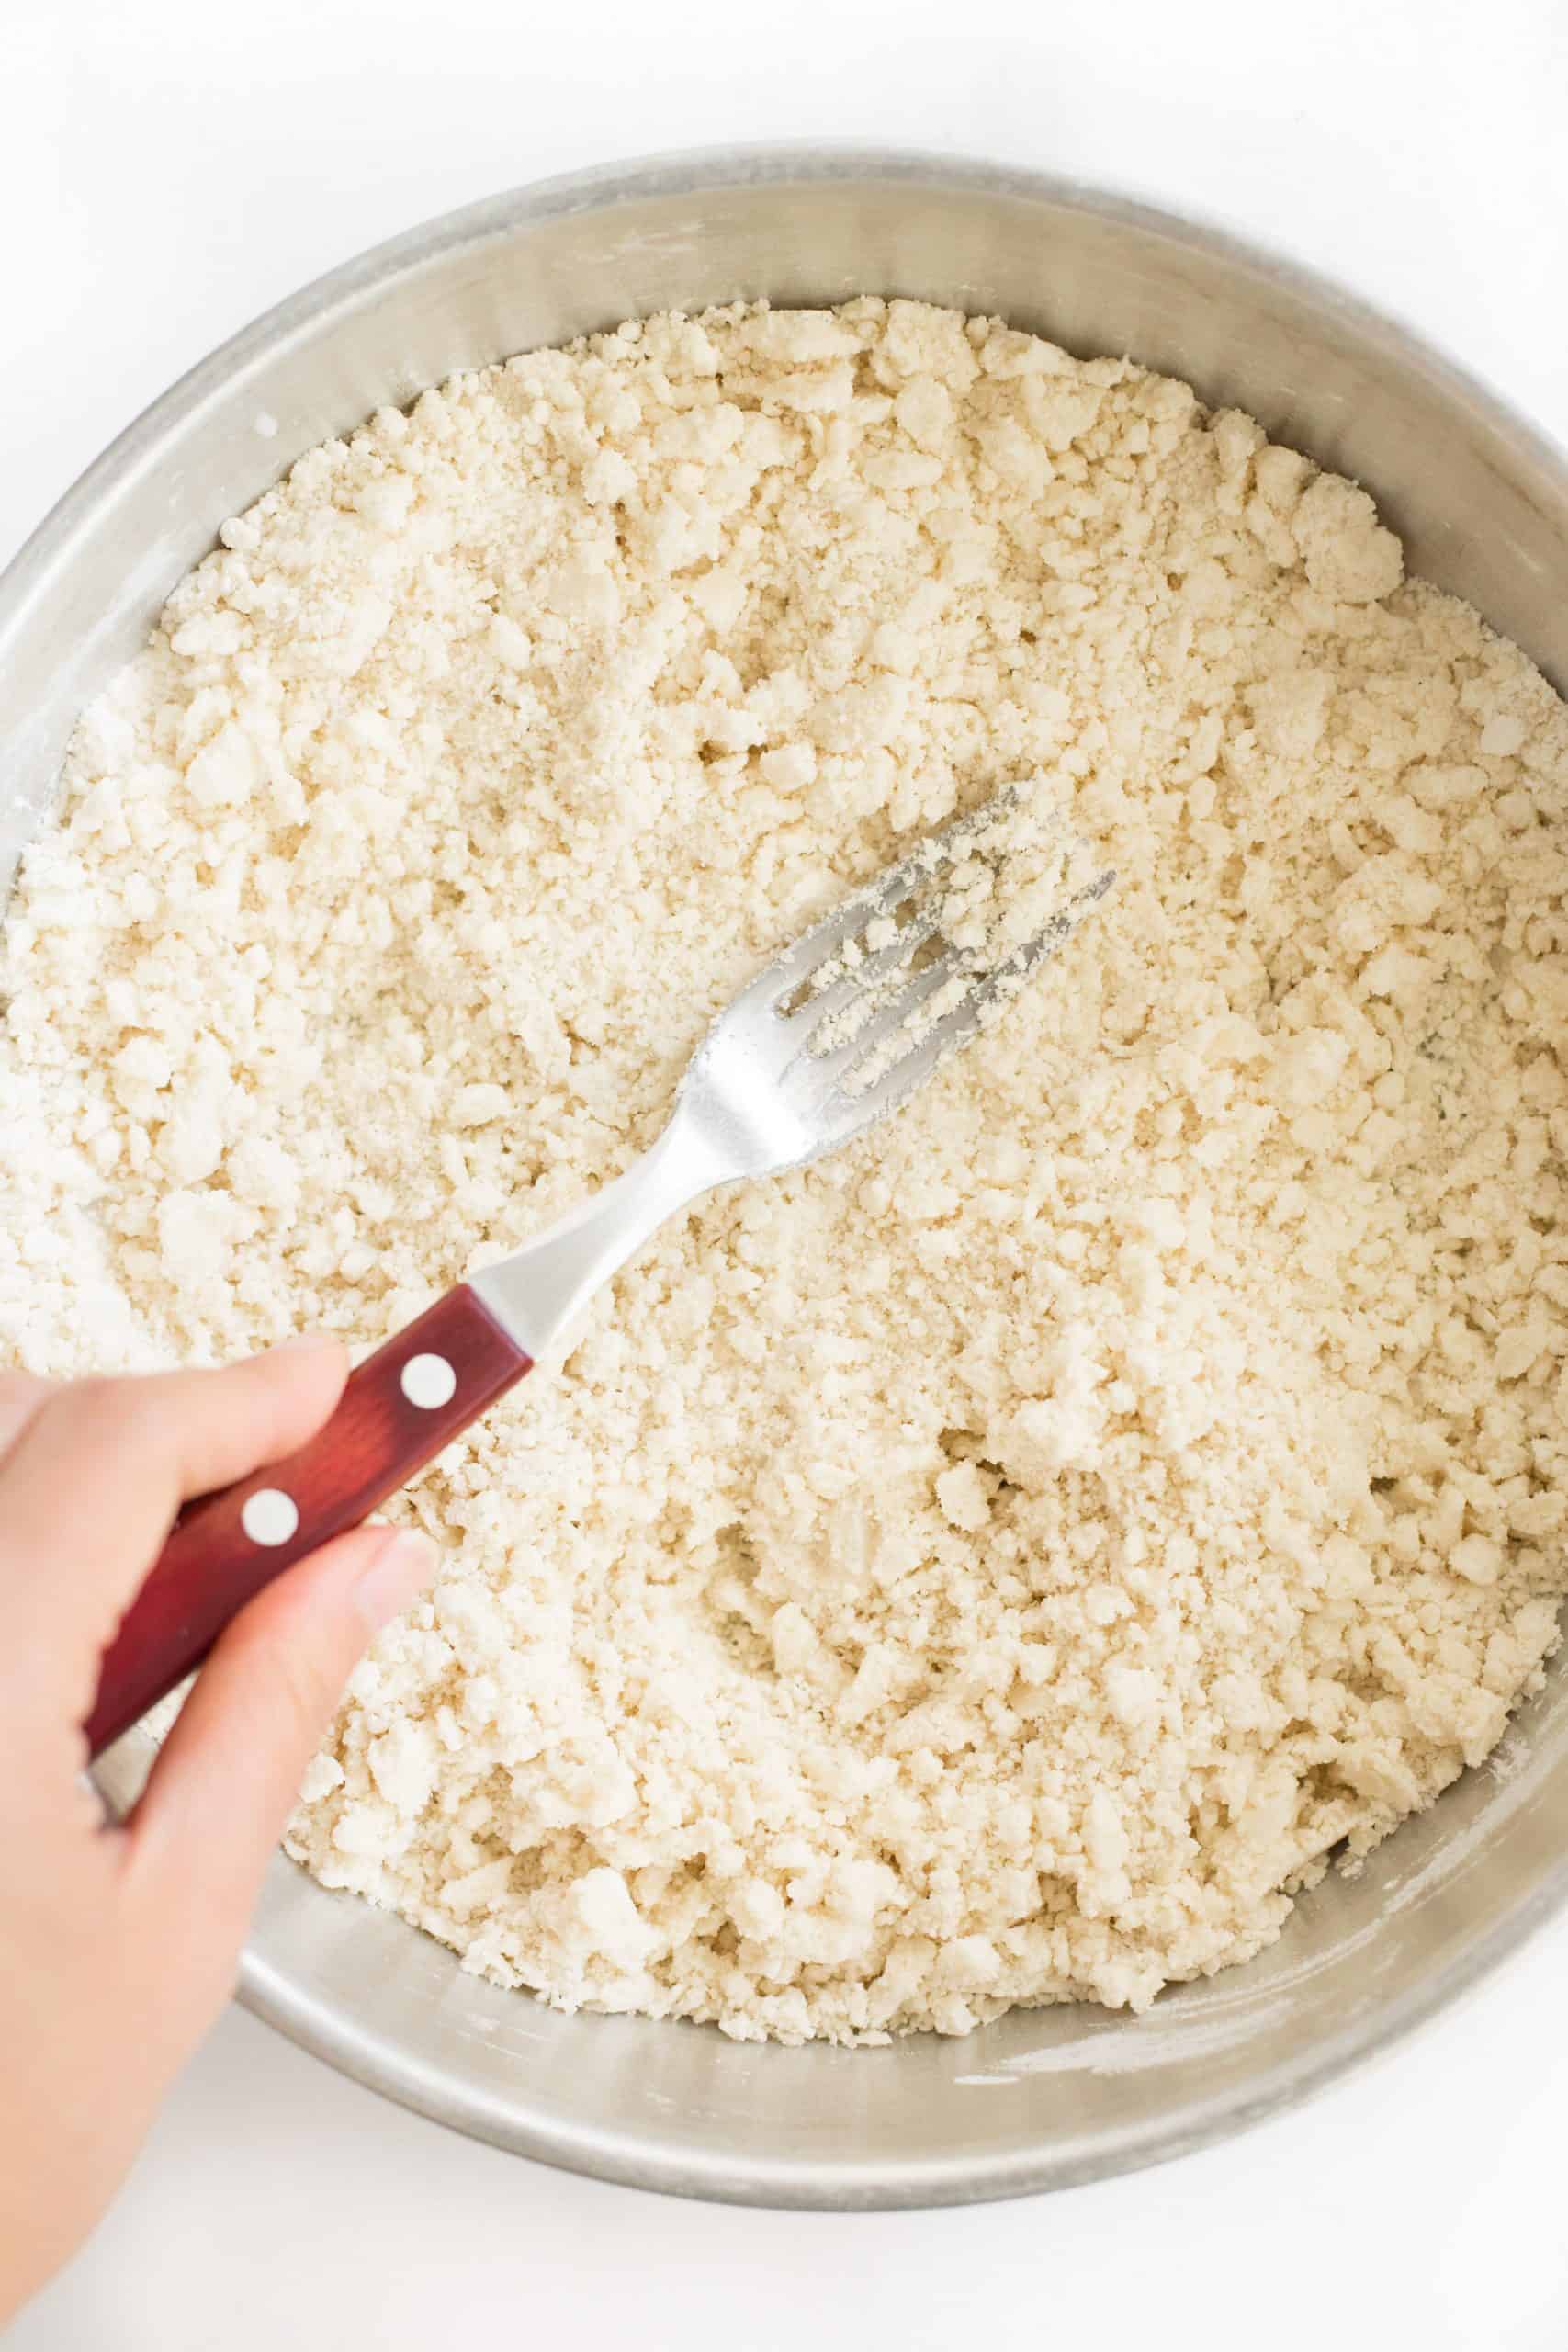 Using a fork to cut the chilled coconut oil into the flour.